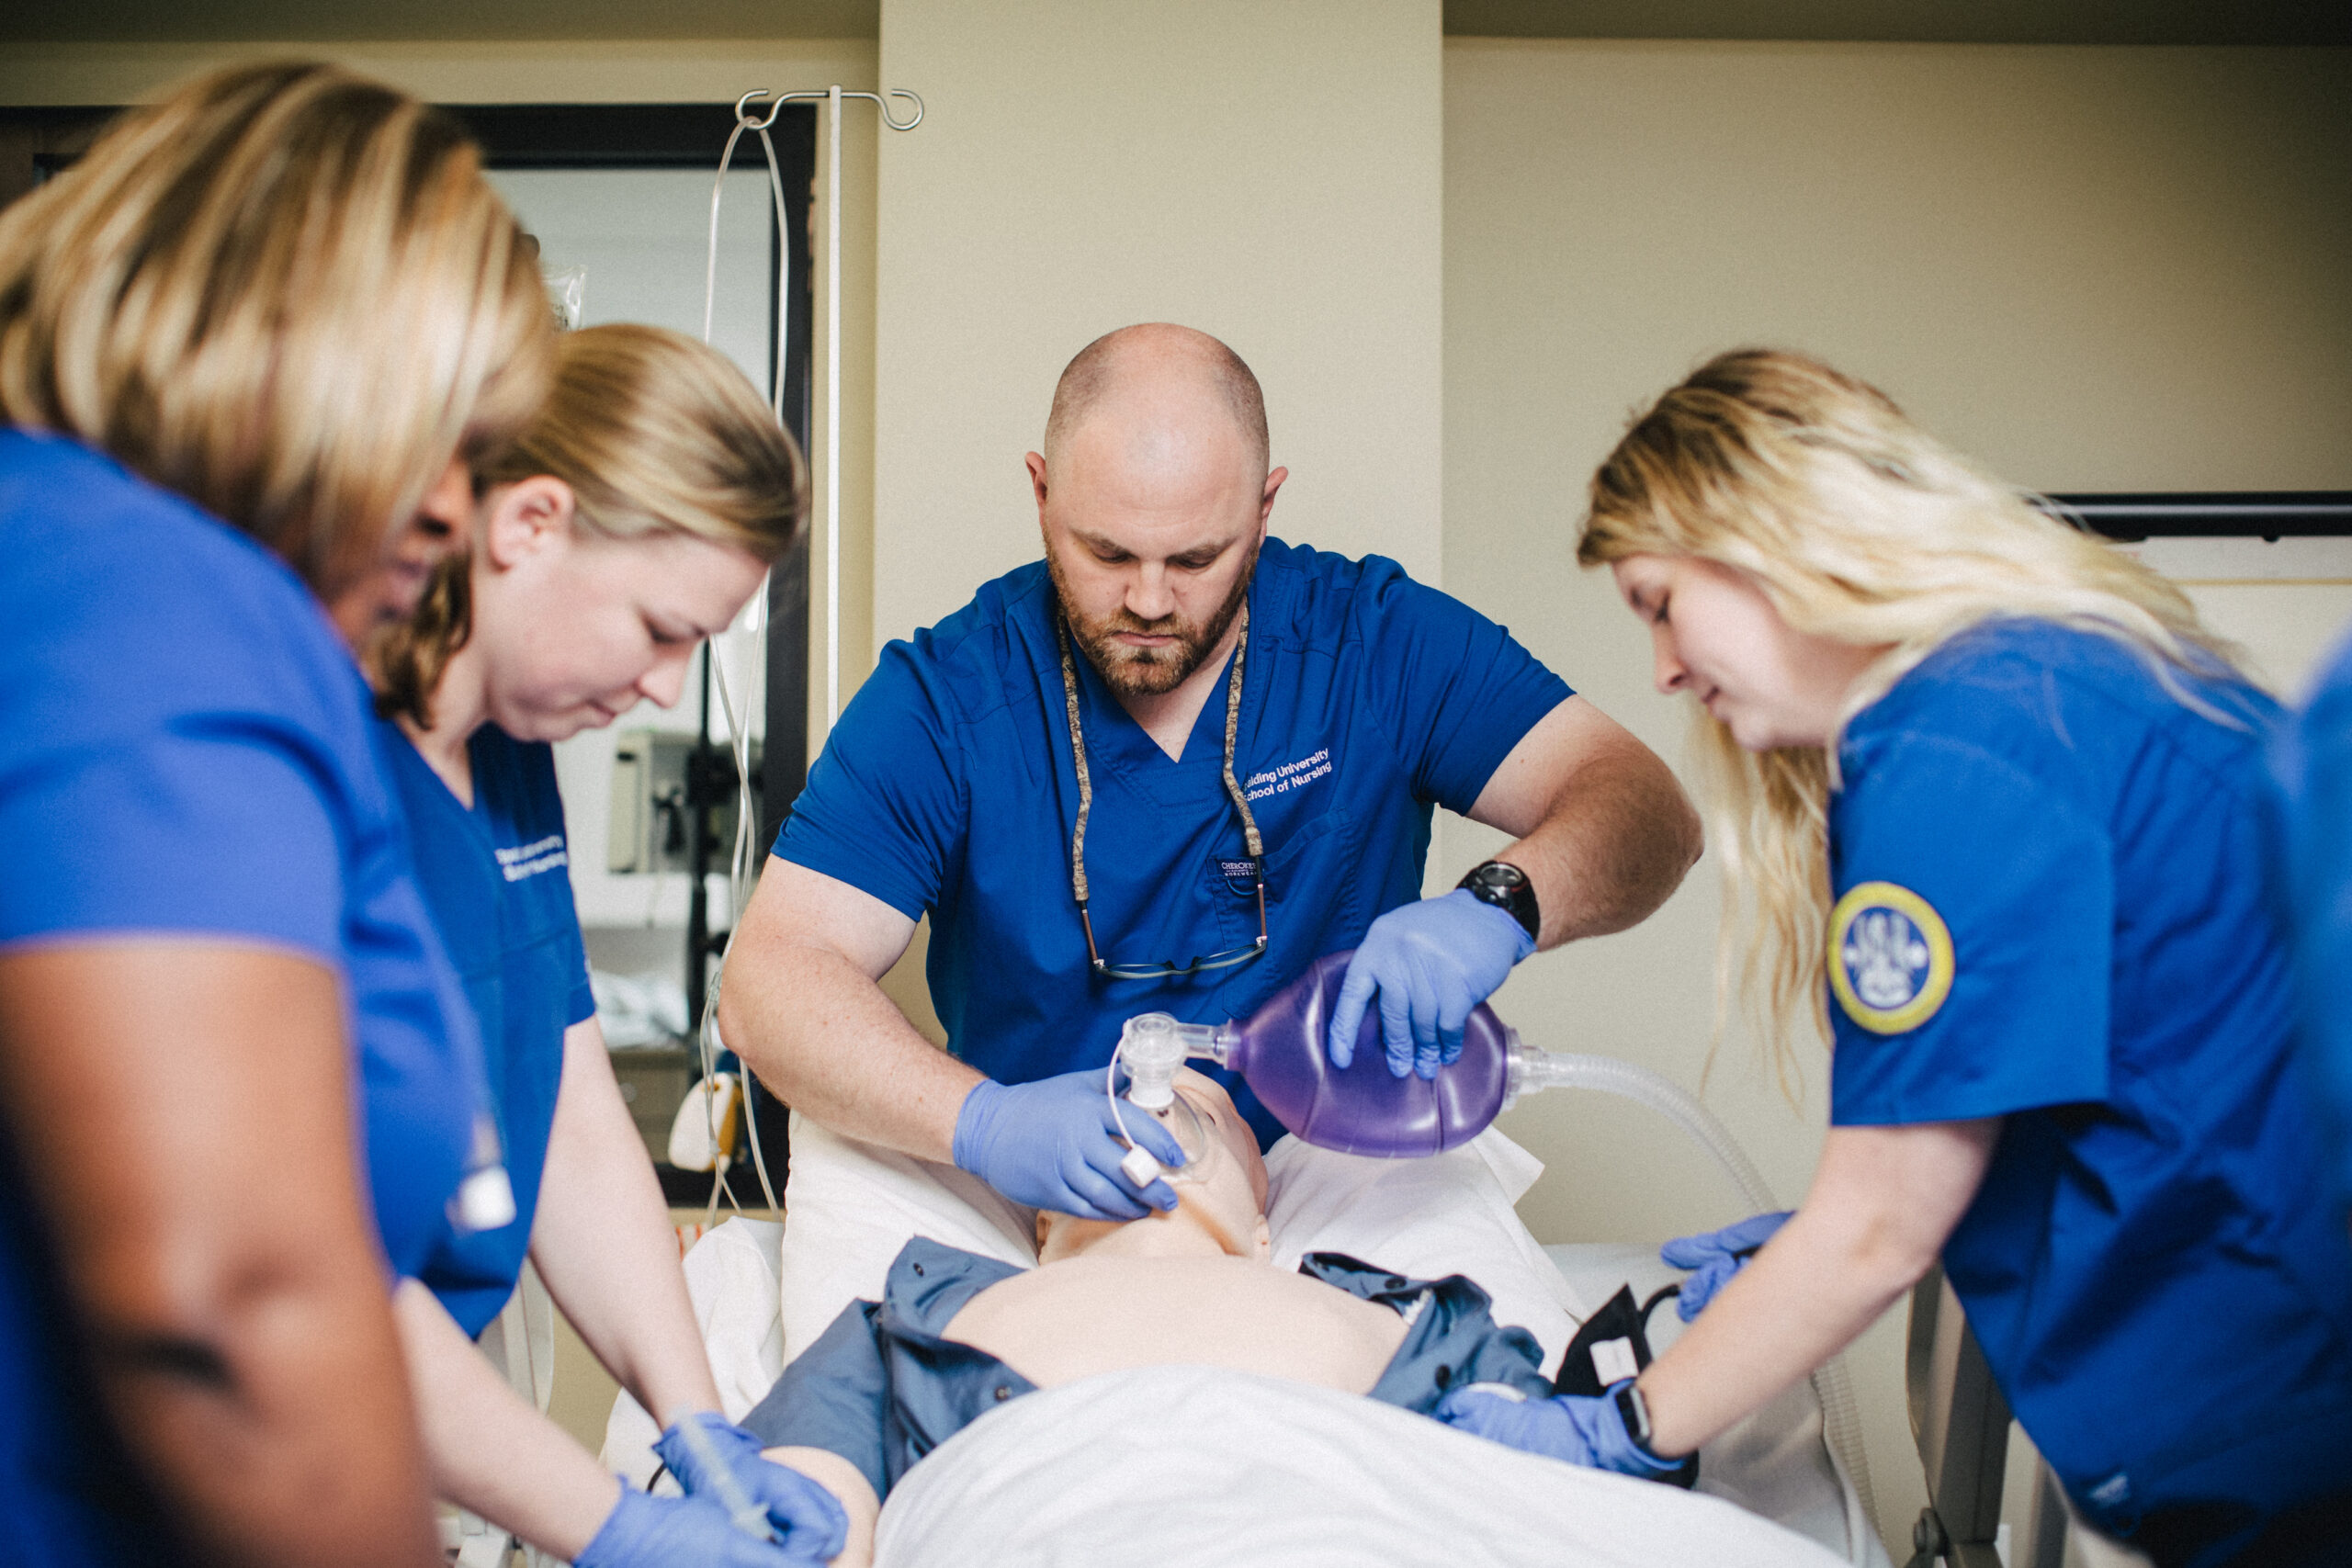 Spalding nursing students practice providing air for patient on dummy